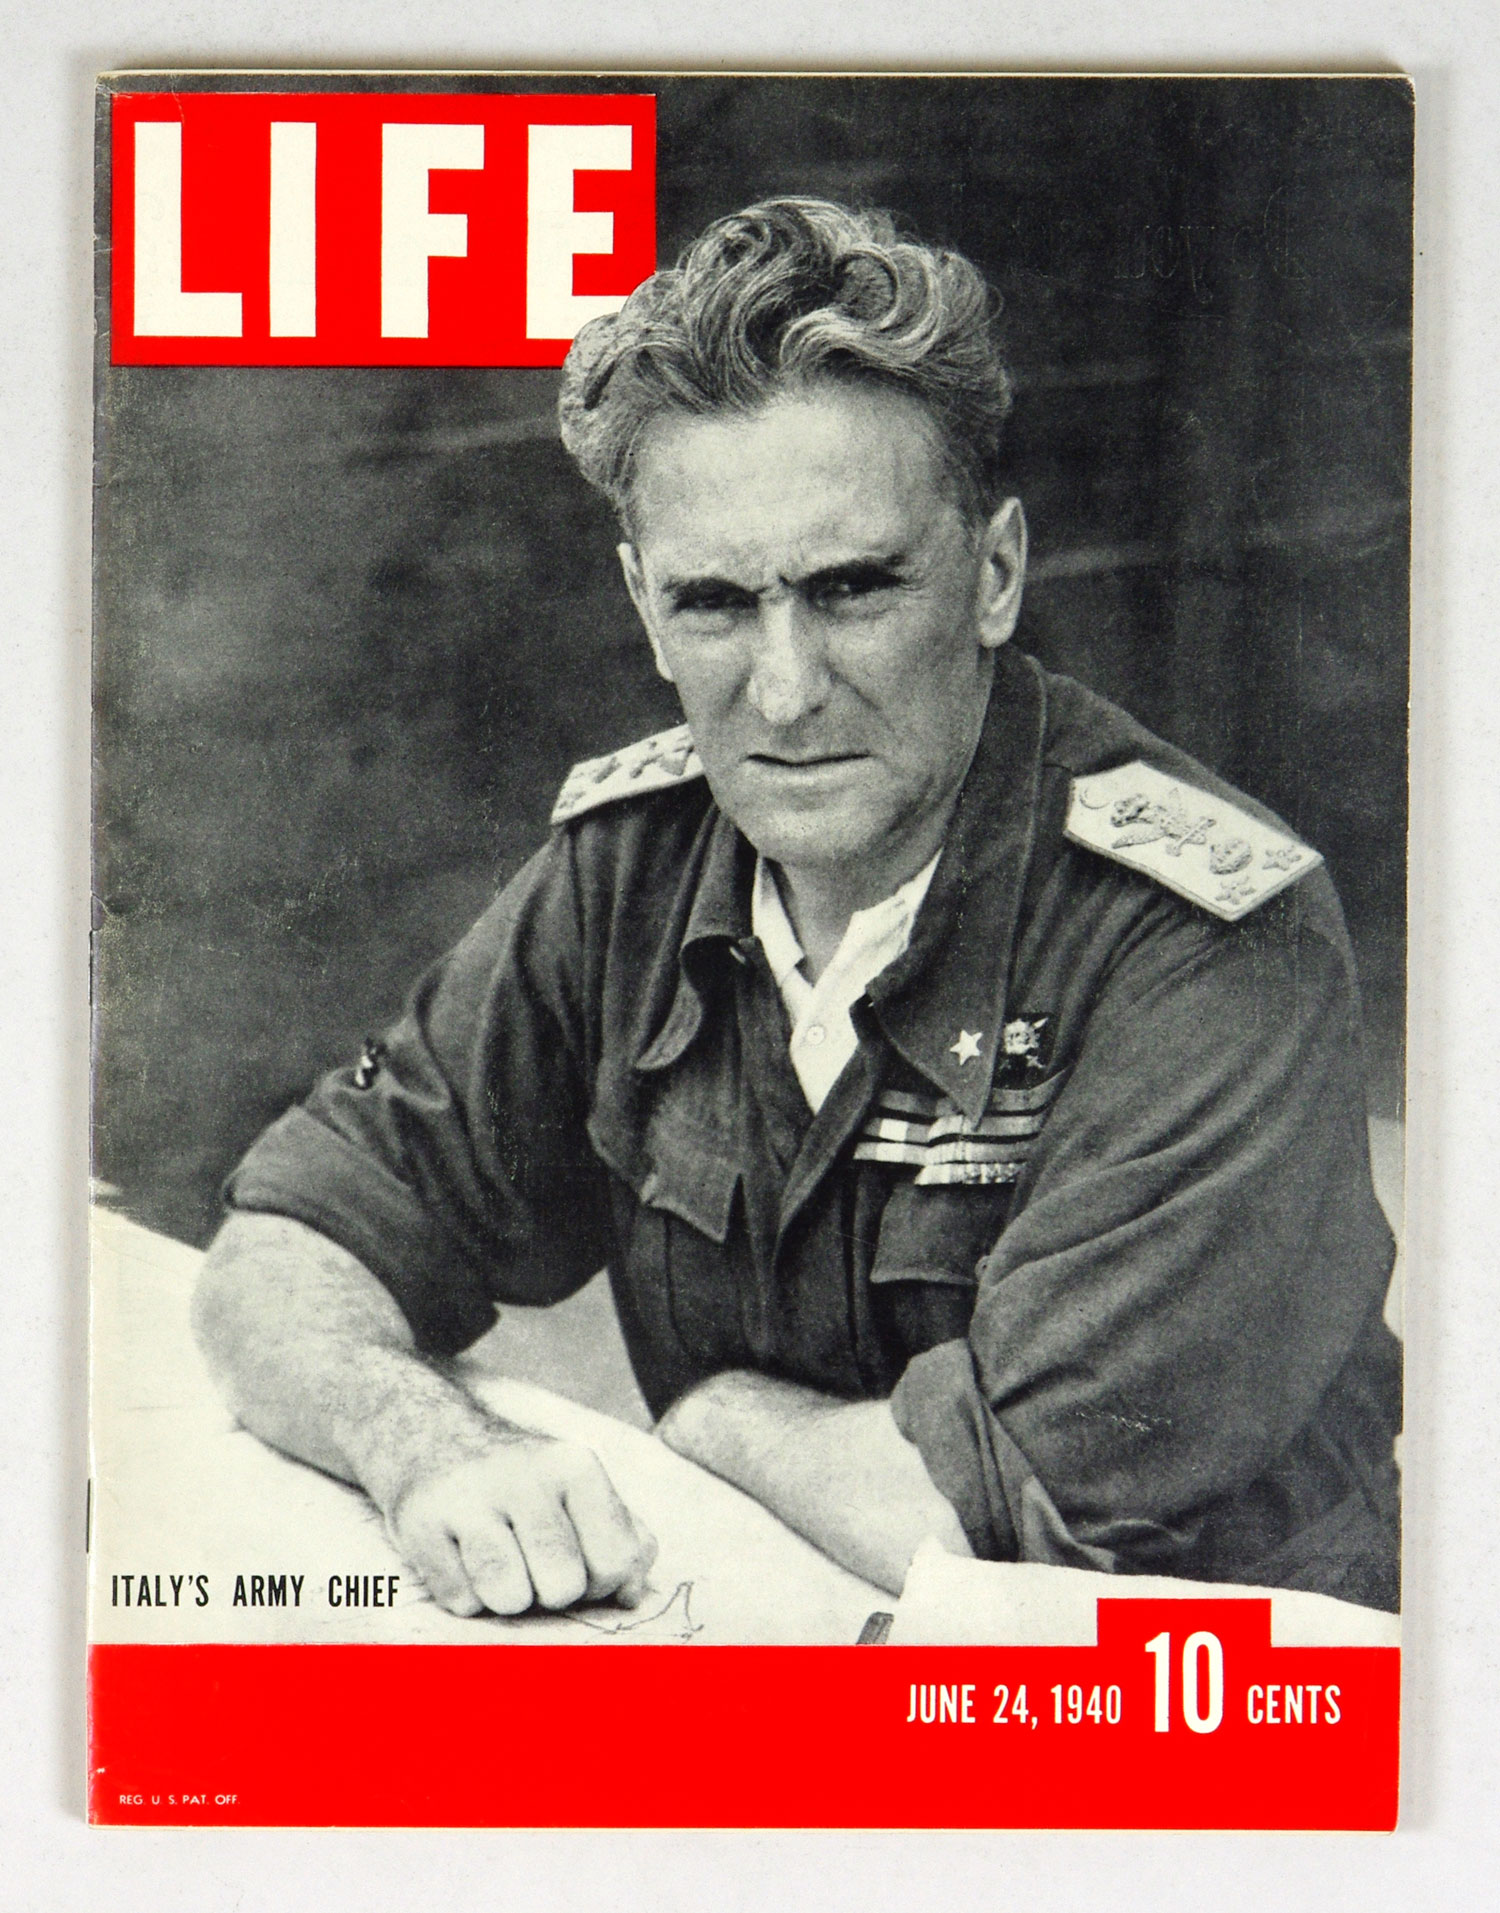 LIFE Magazine Back Issue 1940 June 24 Italy's Army Chief